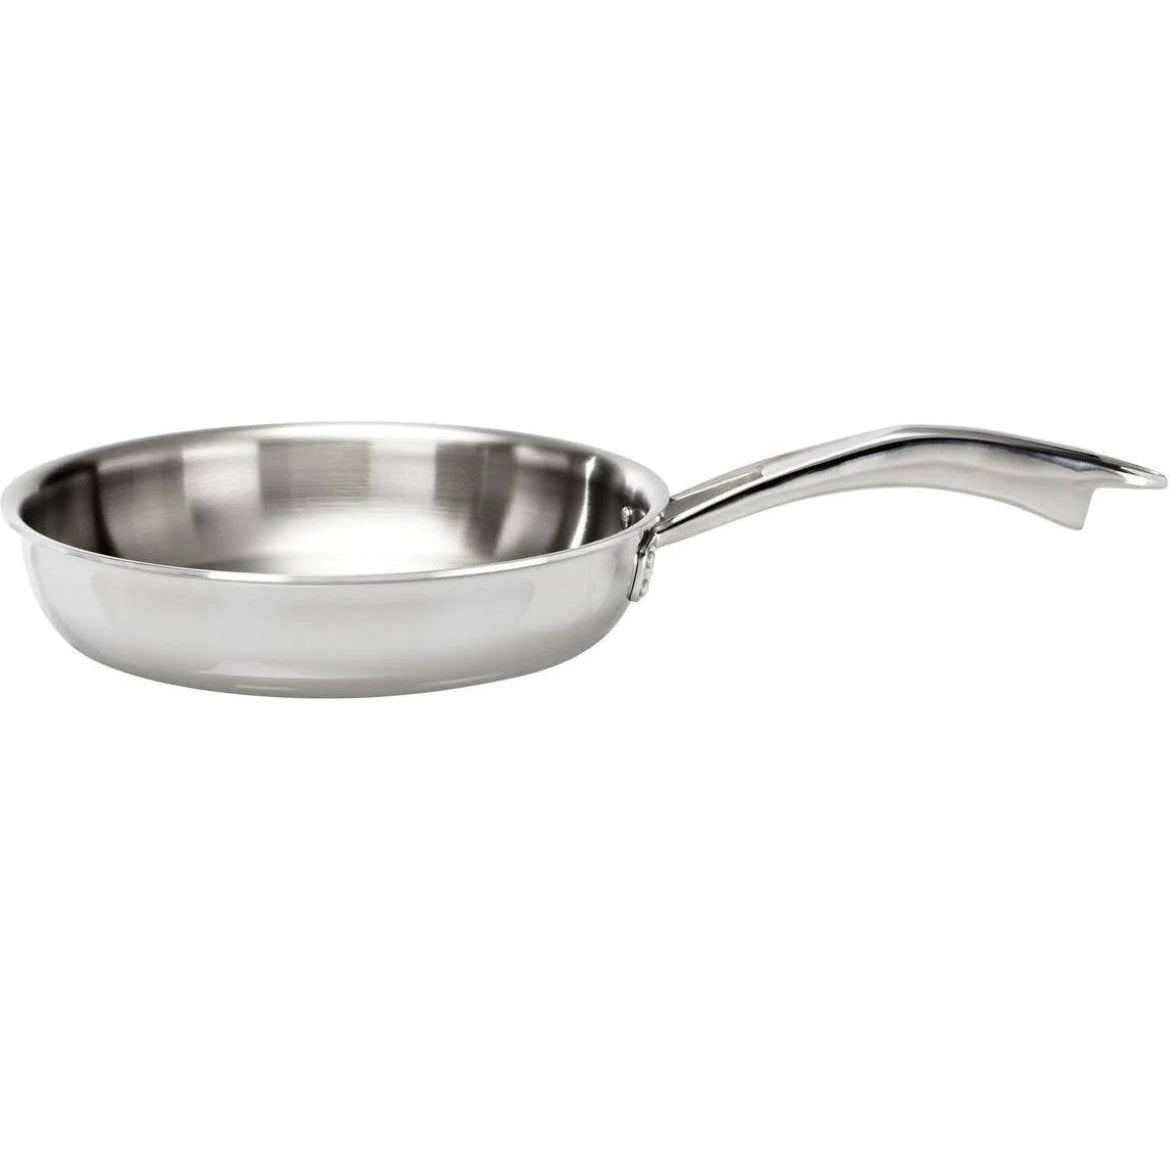 Zwilling Truclad 26cm / 10in Stainless Steel Frying Pan